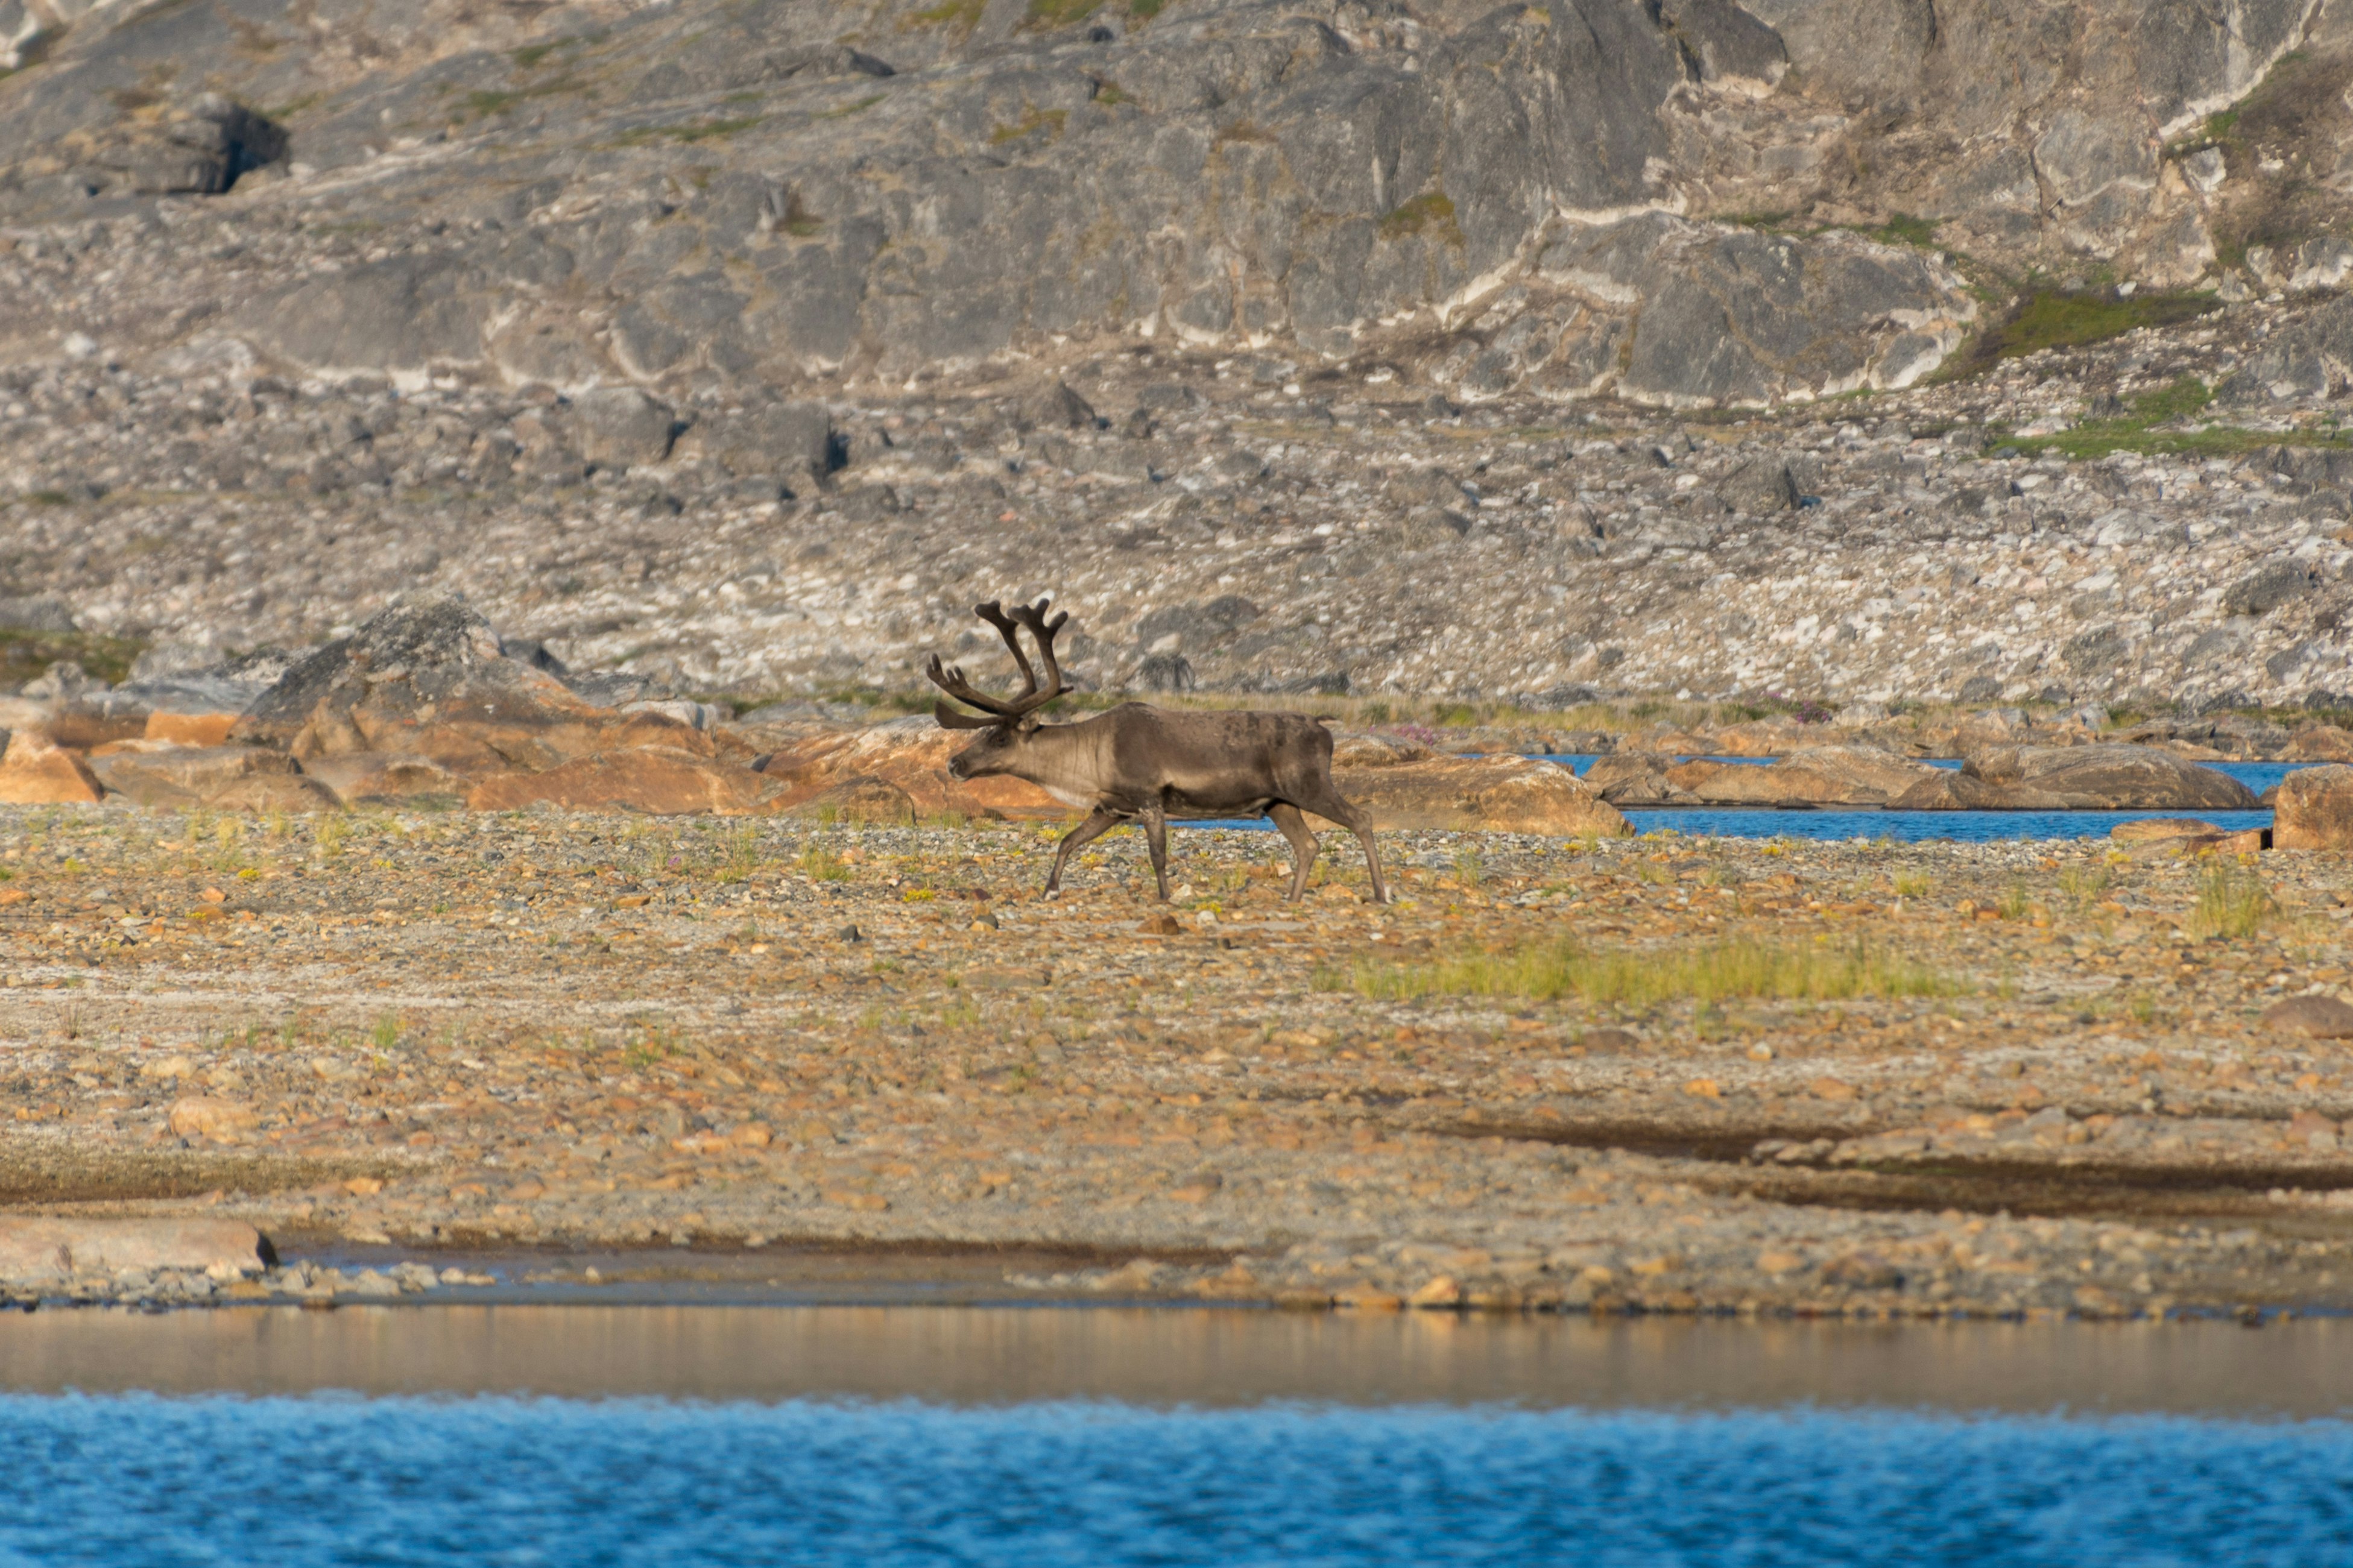 A reindeer moving through Arctic scenery with water in the foreground.